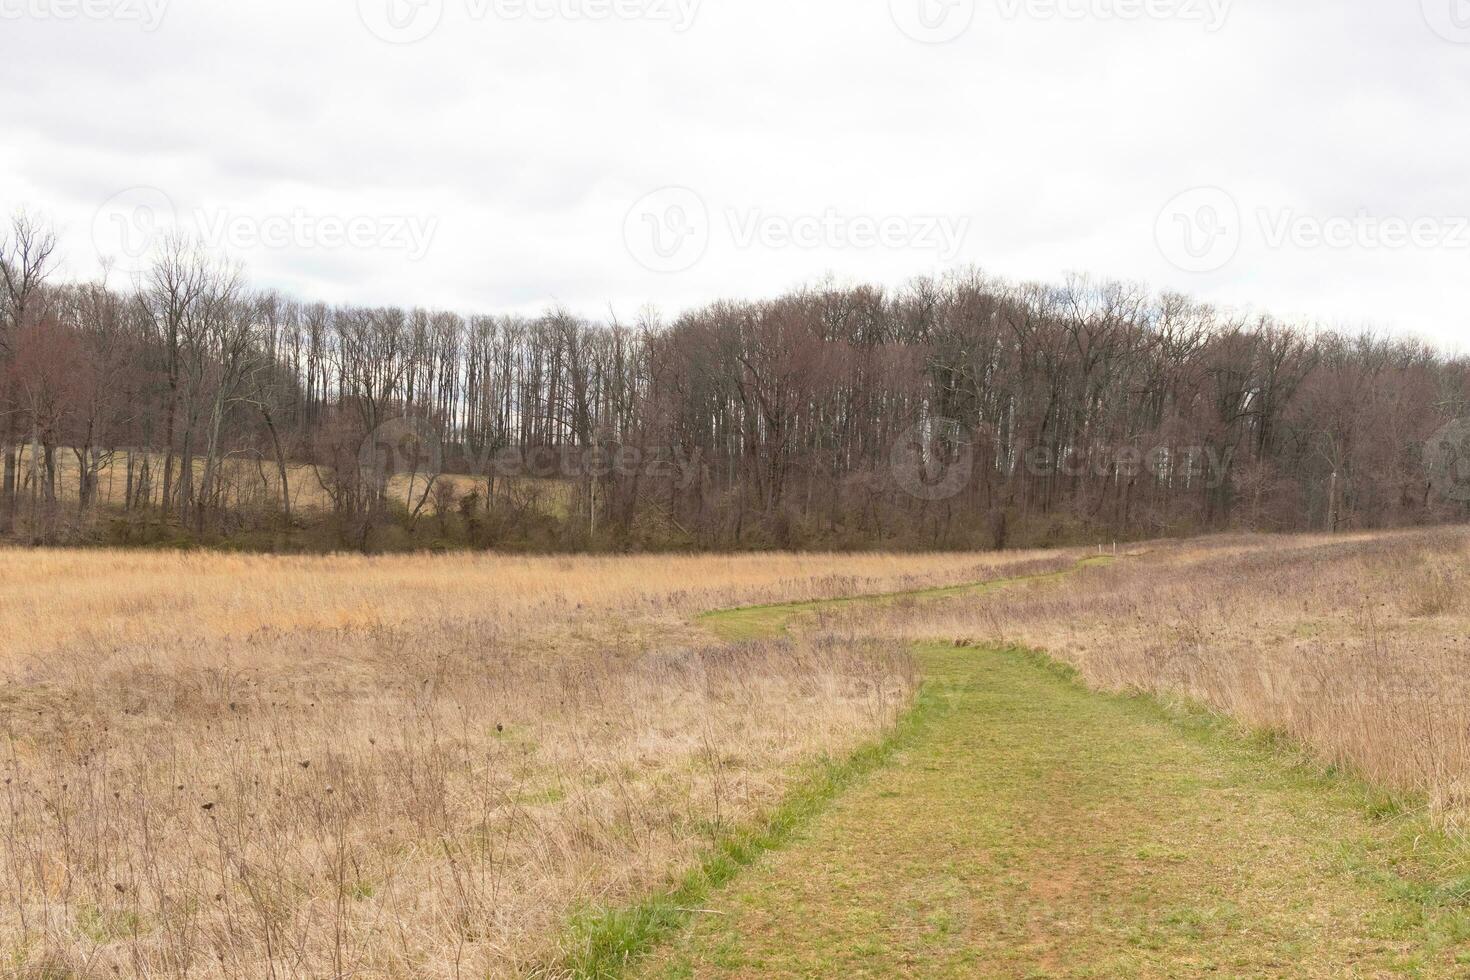 This beautiful walking path was cut through the field. The green, well-manicured lawn standing out among all the brown tall grass. This trail heads through a nature preserved around a wooded area. photo